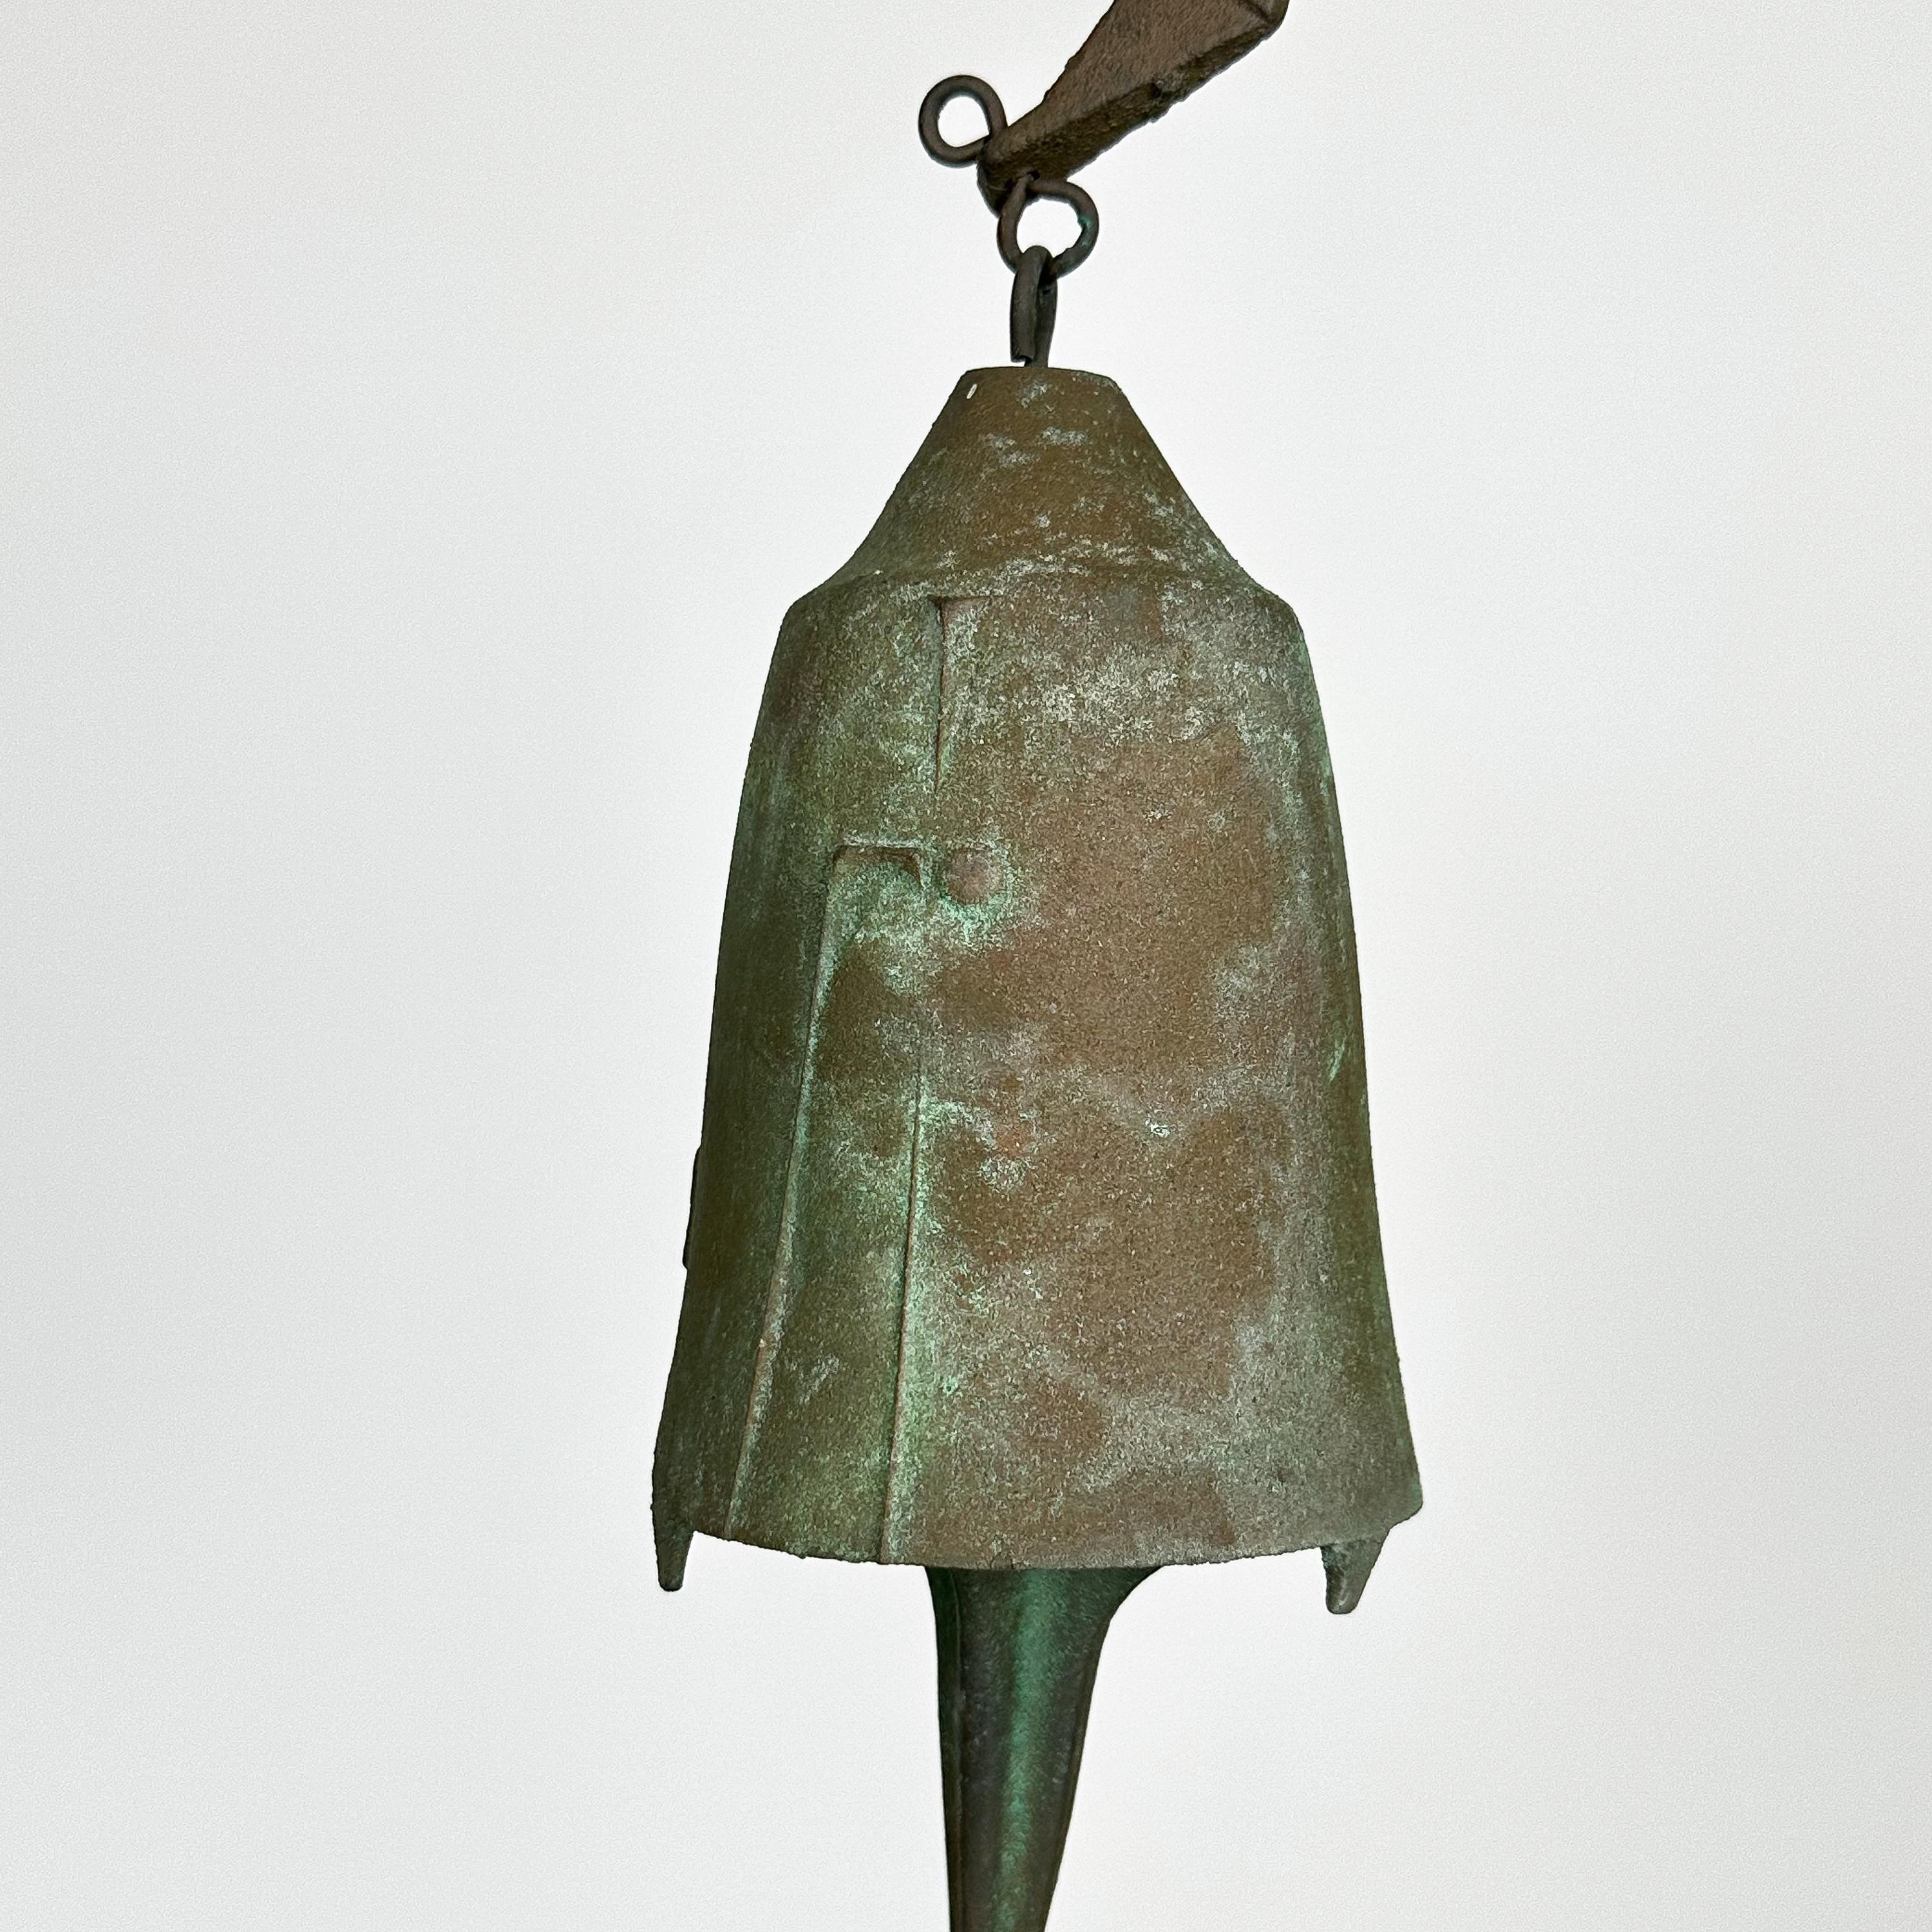 Set of 3 Bronze Bells / Wind Chimes by Paolo Soleri for Arcosanti 7